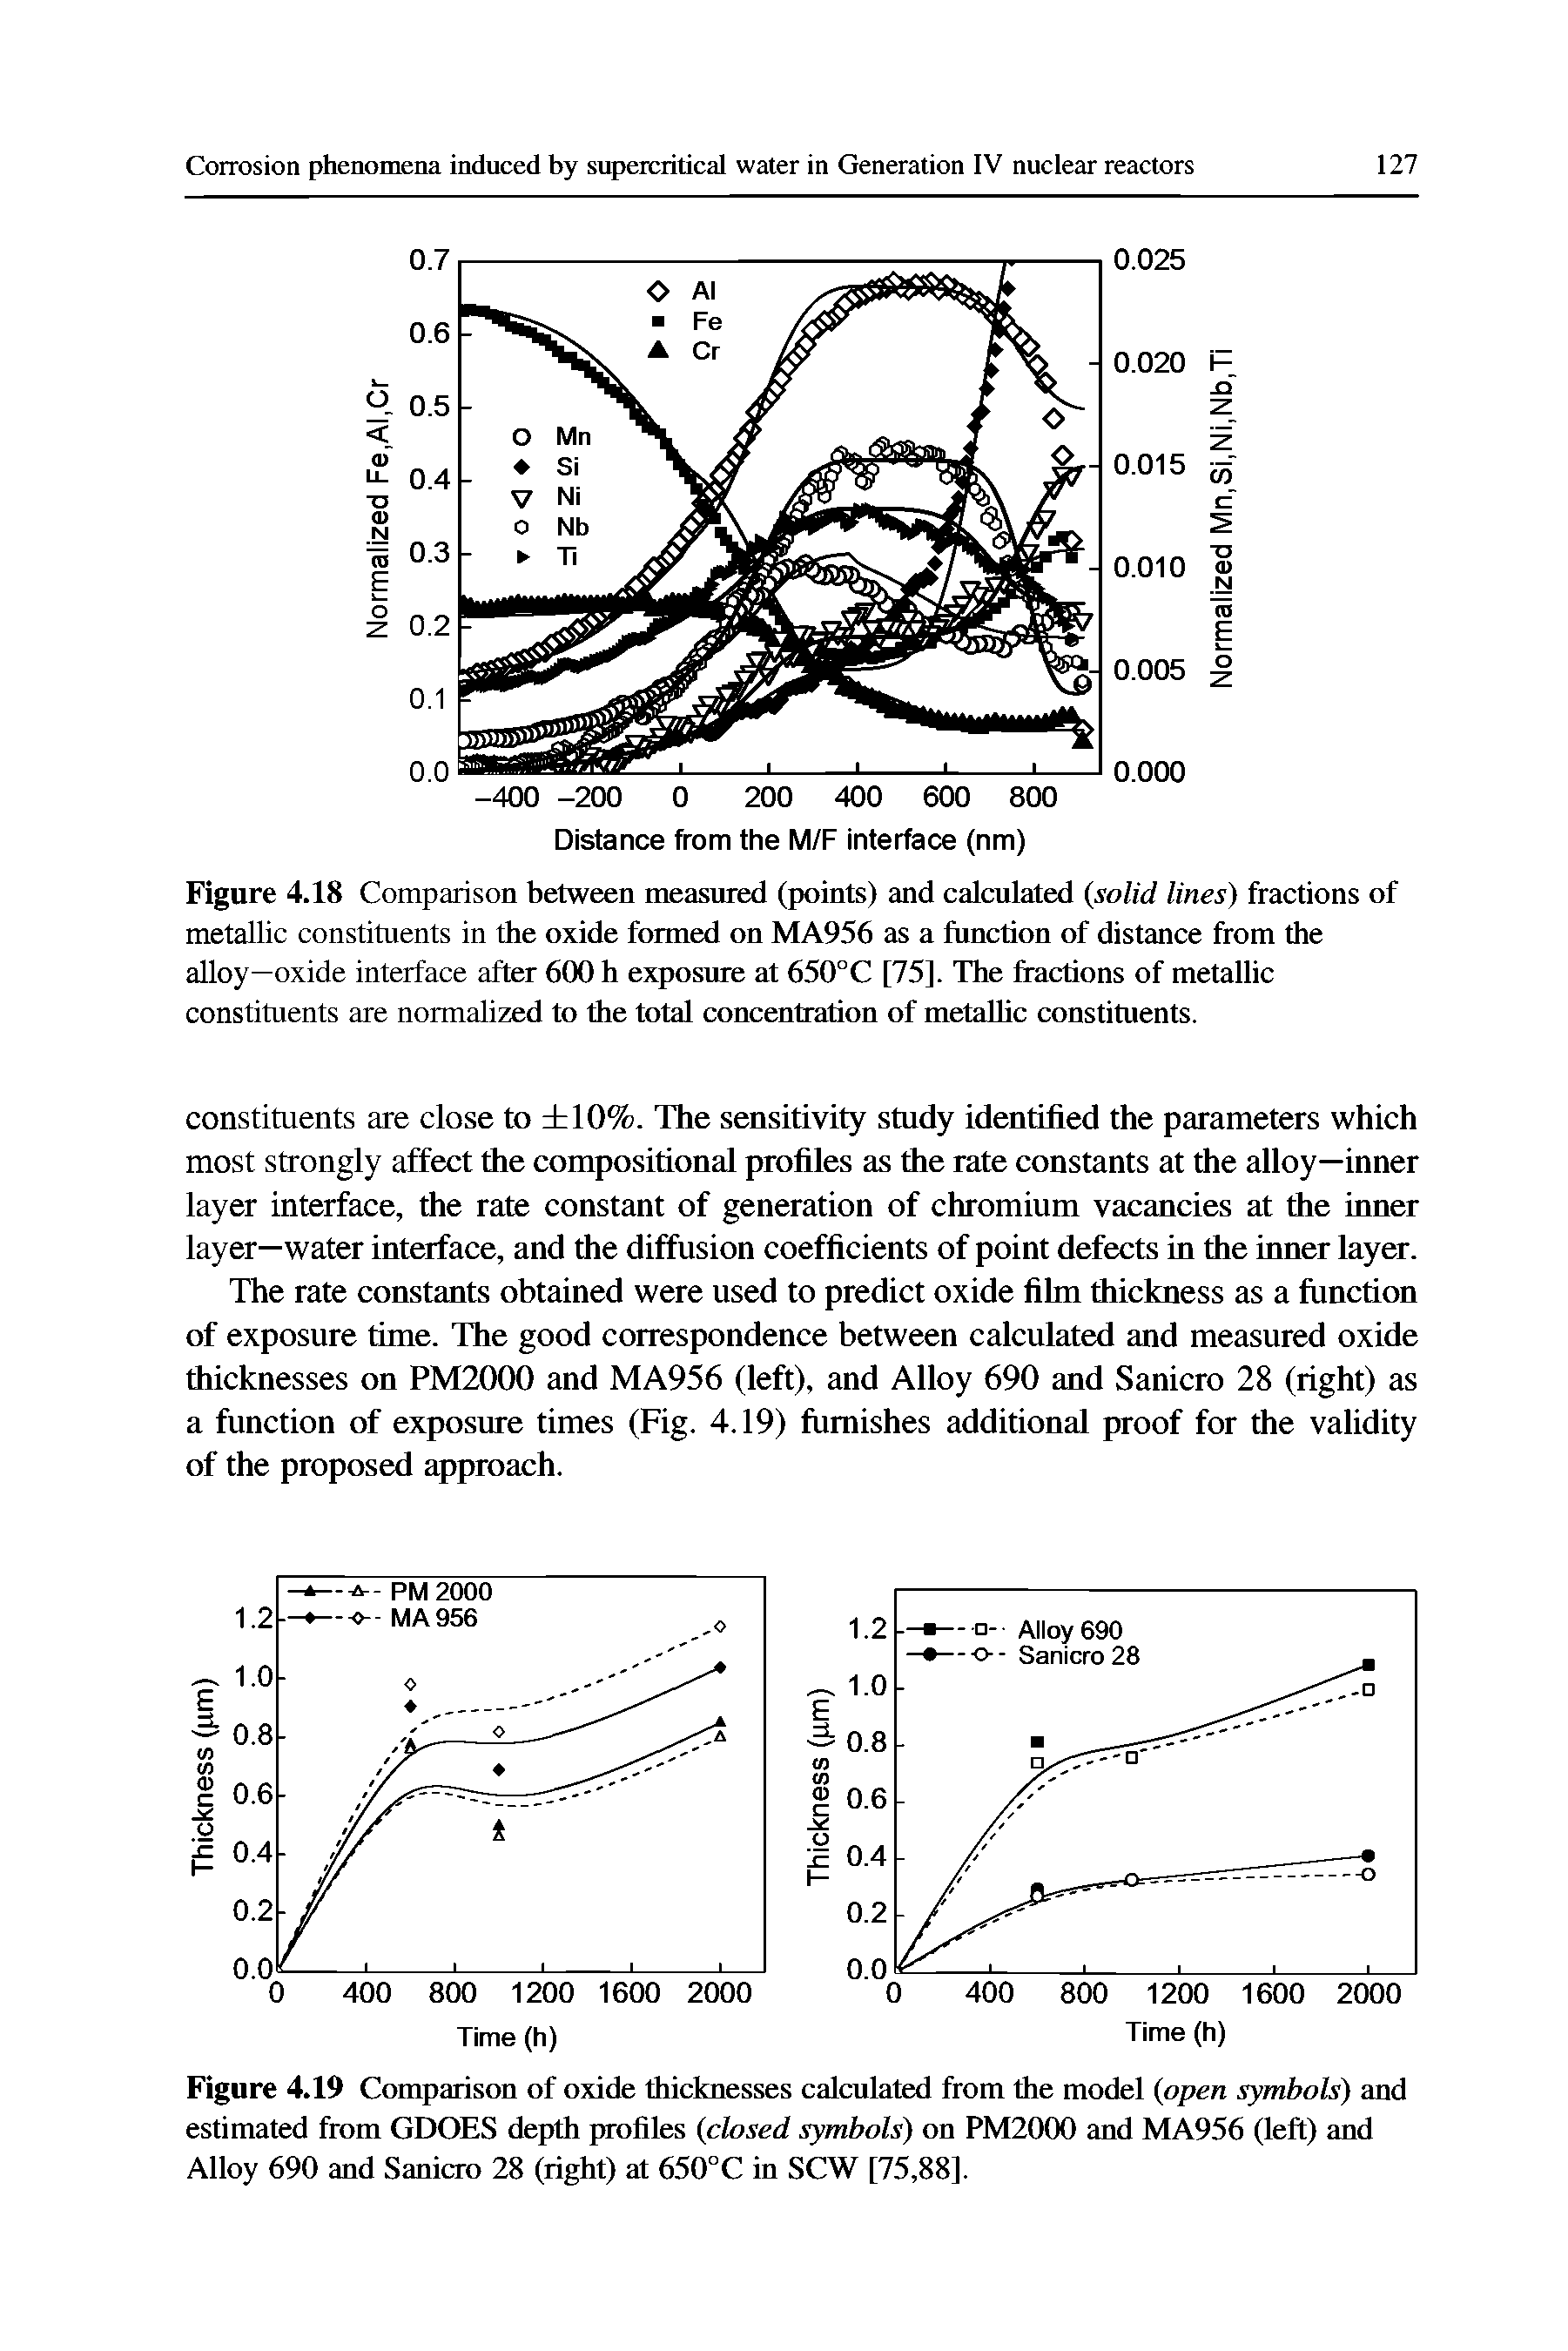 Figure 4.18 Comparison between measured (points) and calculated solid lines) fractions of metallic constituents in the oxide formed on MA956 as a function of distance from the alloy—oxide interface after 600 h exposure at 650°C [75]. The fractions of metallic constituents are normalized to the total concentration of metallic constituents.